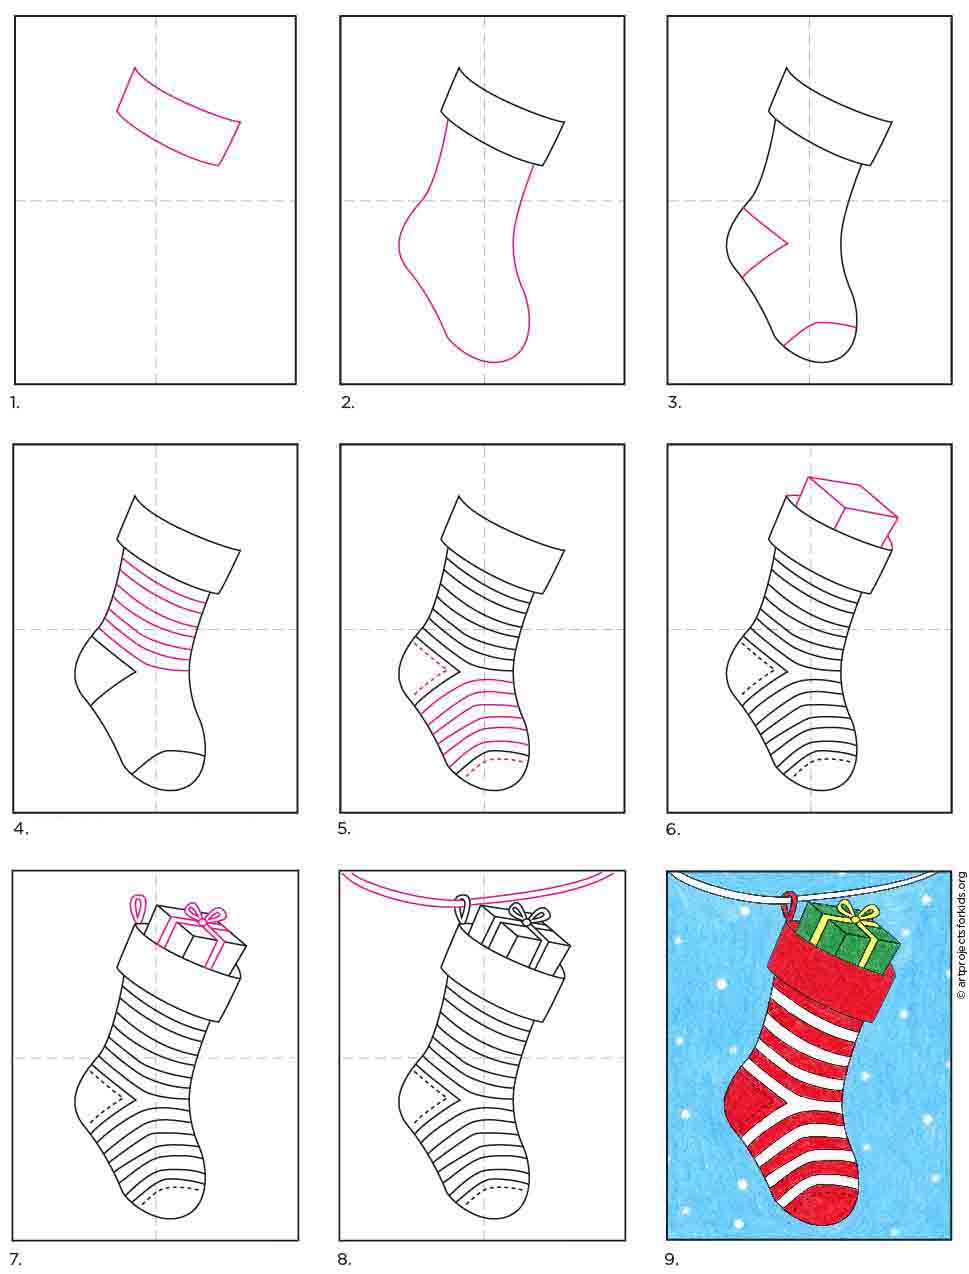 How to Draw a Christmas Stocking Art Projects for Kids